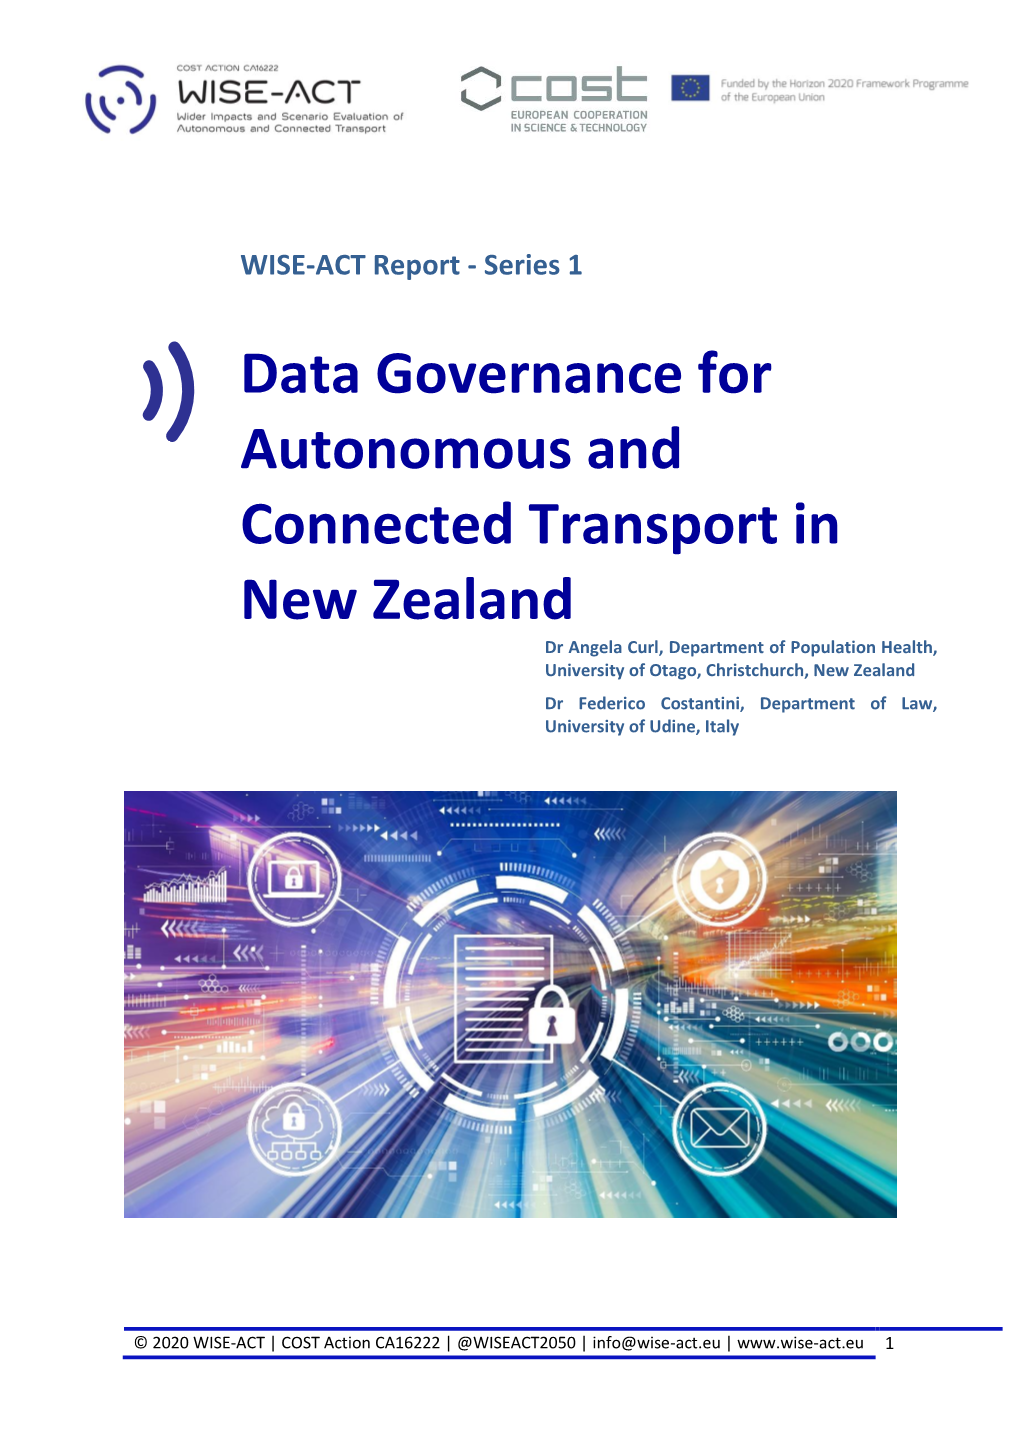 Data Governance for Autonomous and Connected Transport in New